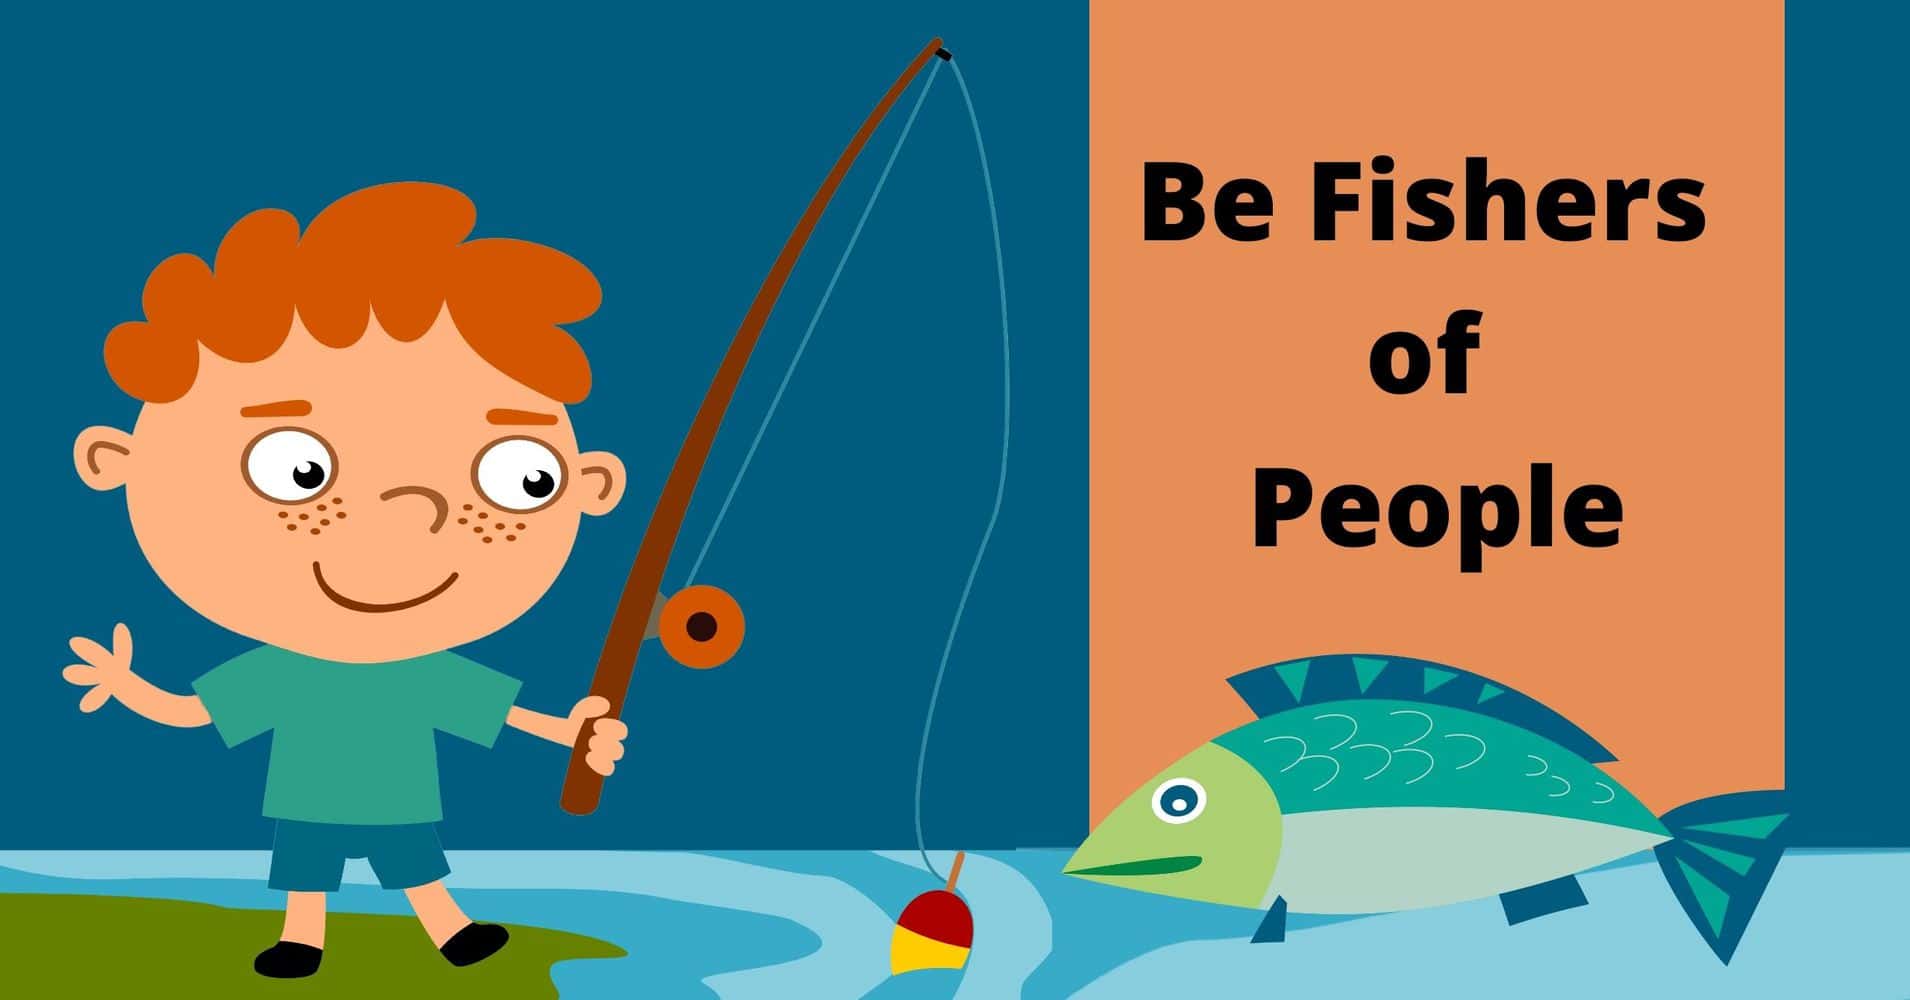 Featured image for “Be Fishers of People”